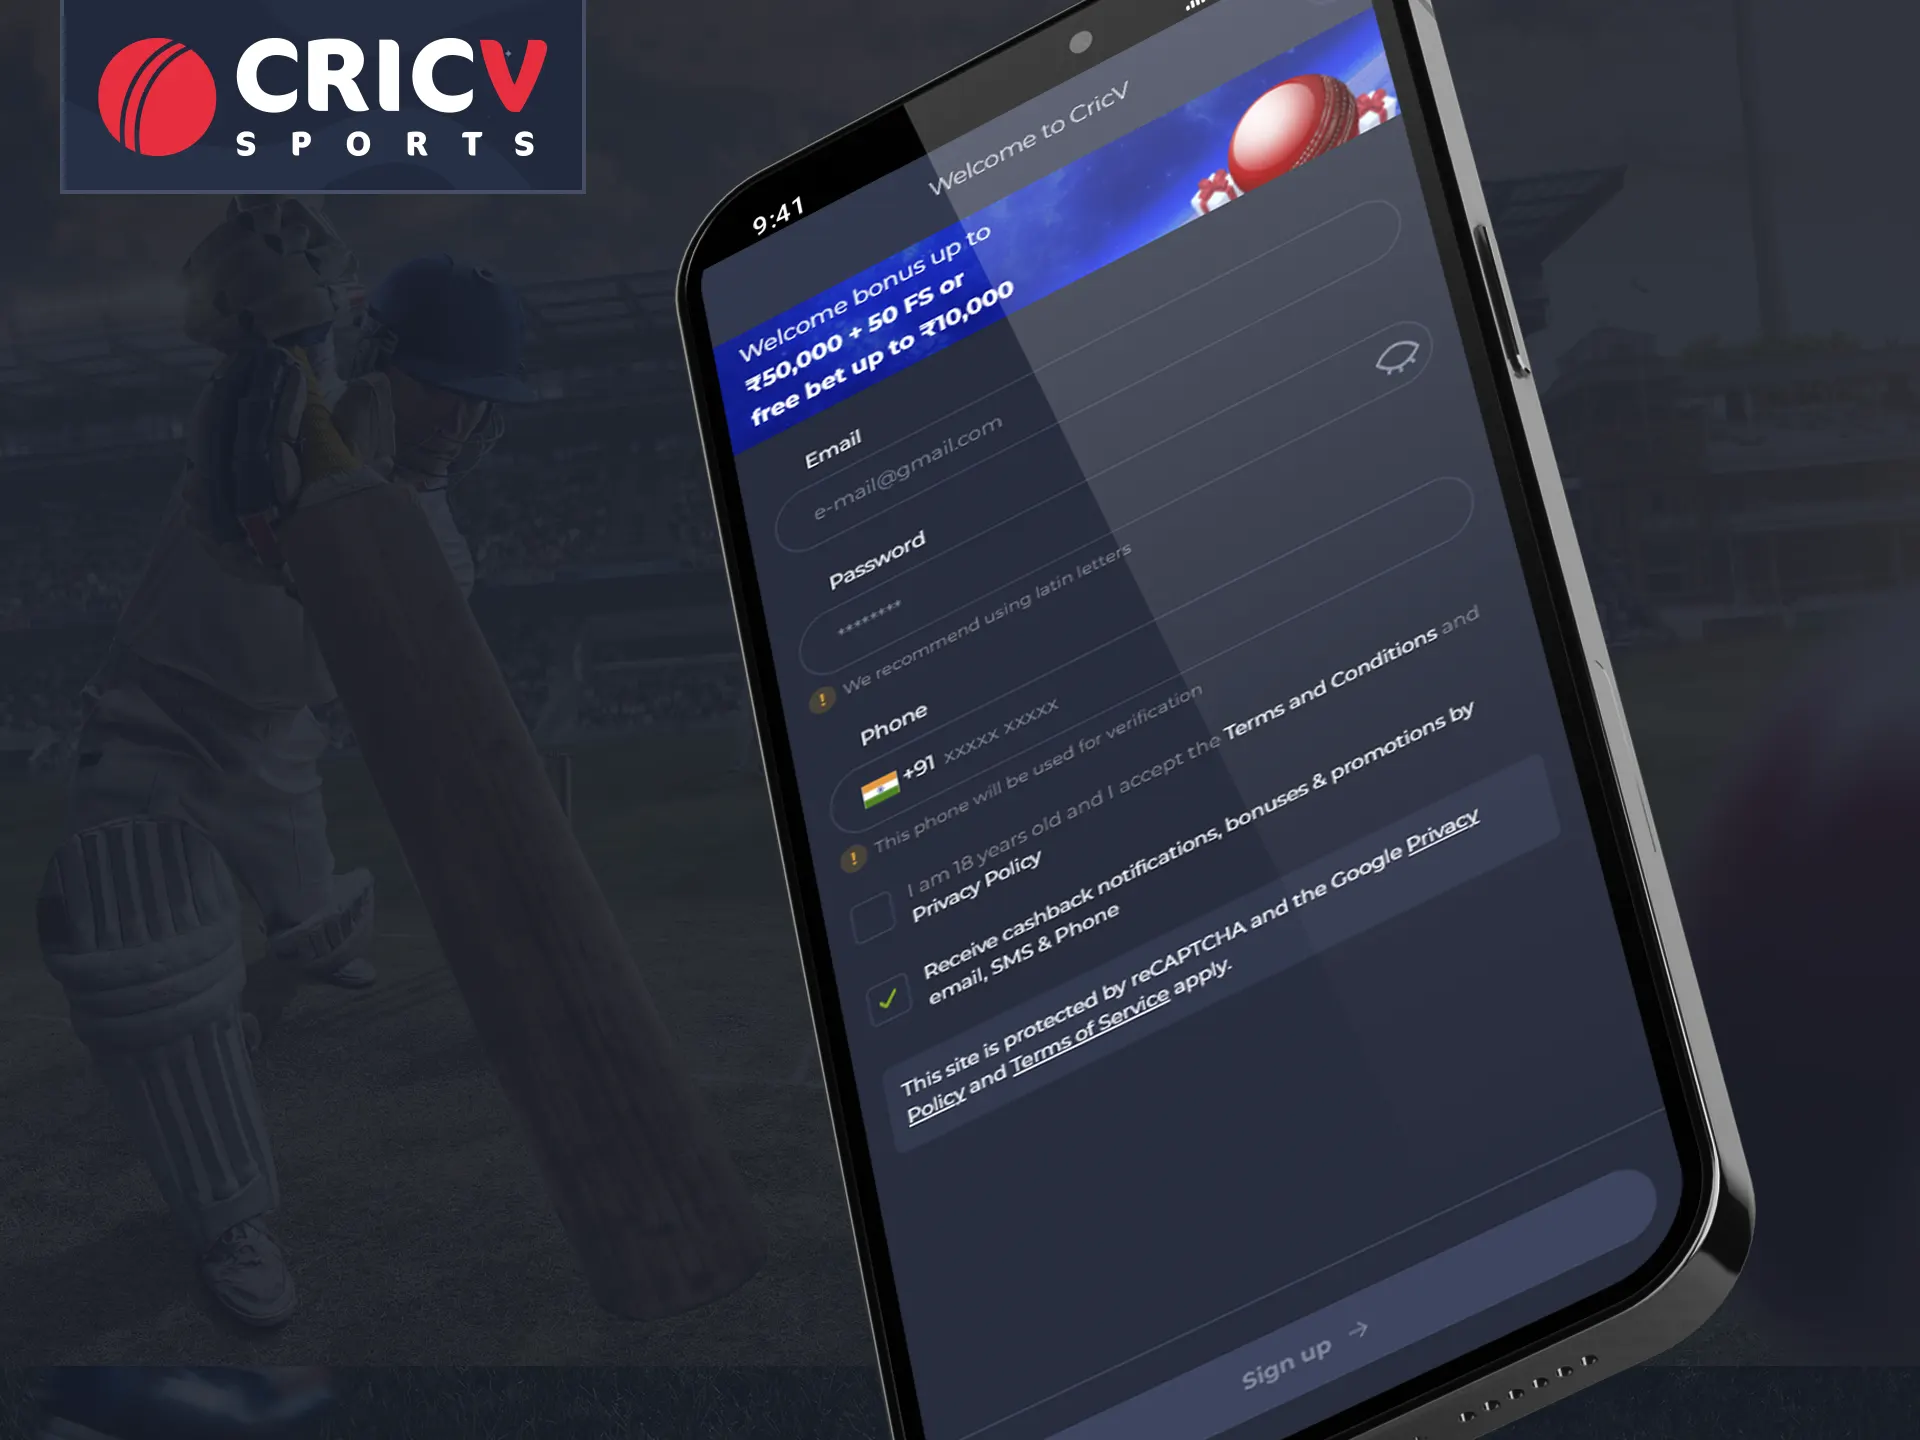 Go through the registration process in the Cricv app.